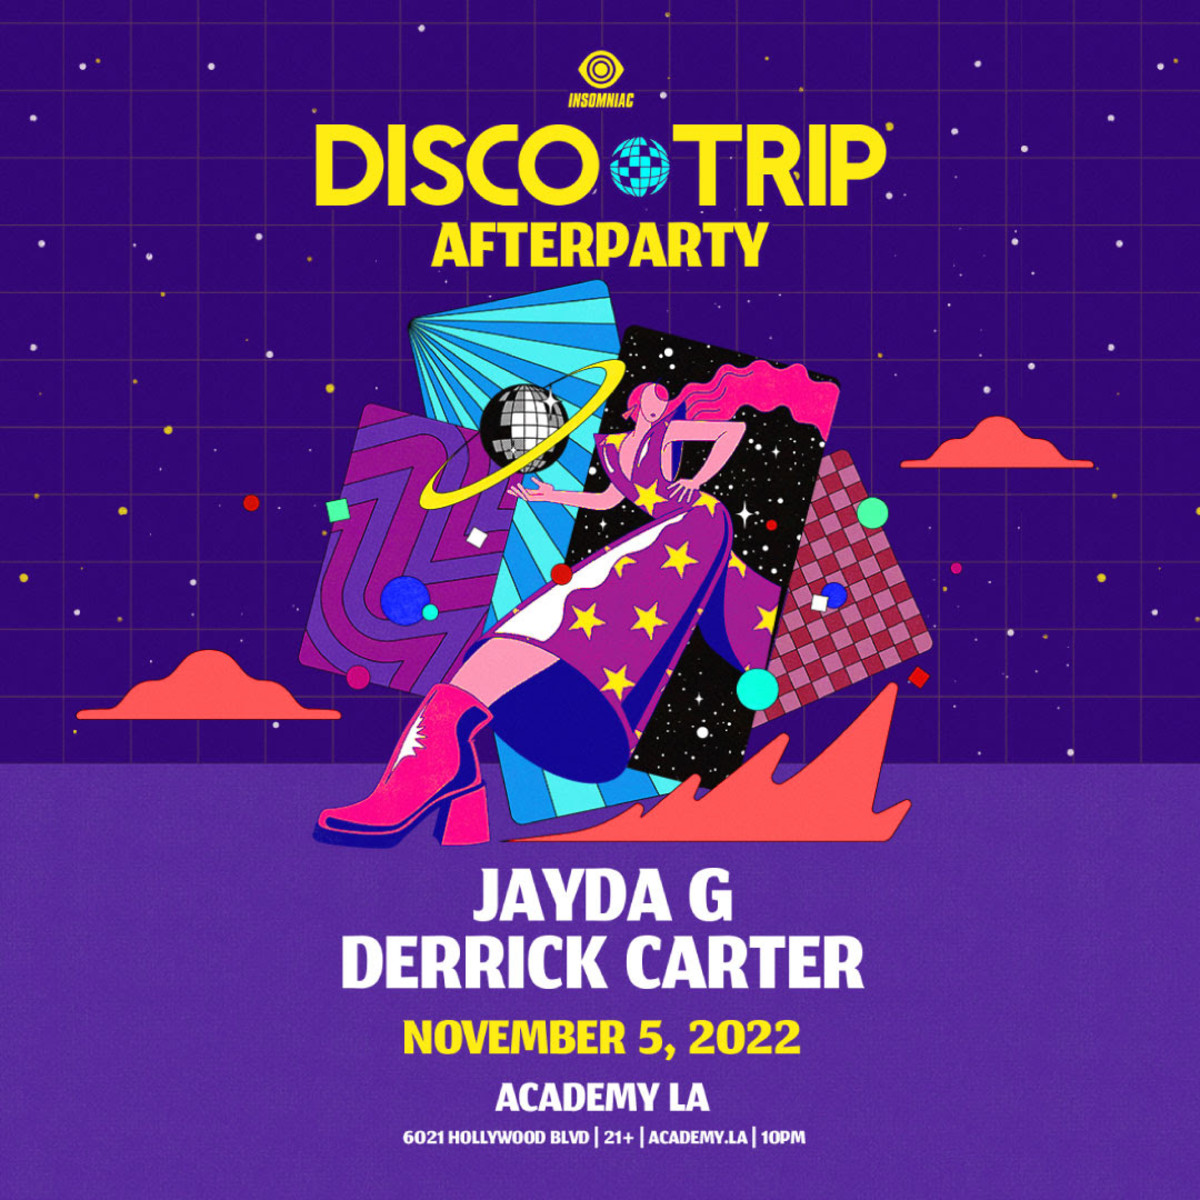 Disco Trip Afterparty